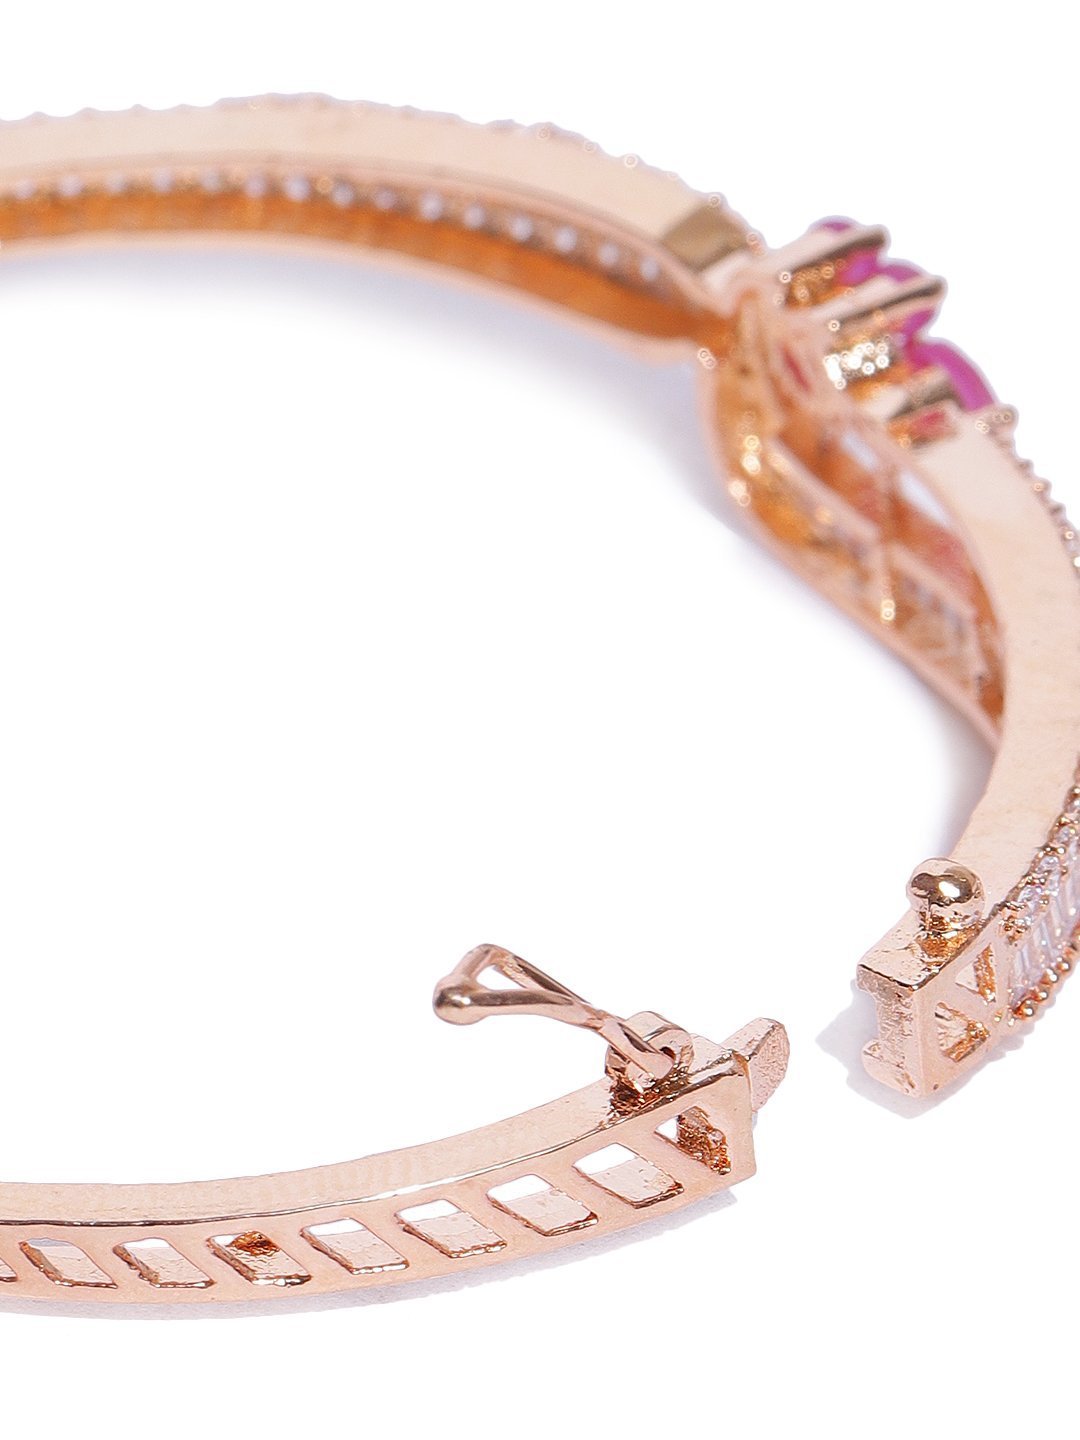 Women's Rose Gold-Plated Ruby and American Diamond Studded Bracelet in Floral Pattern - Priyaasi